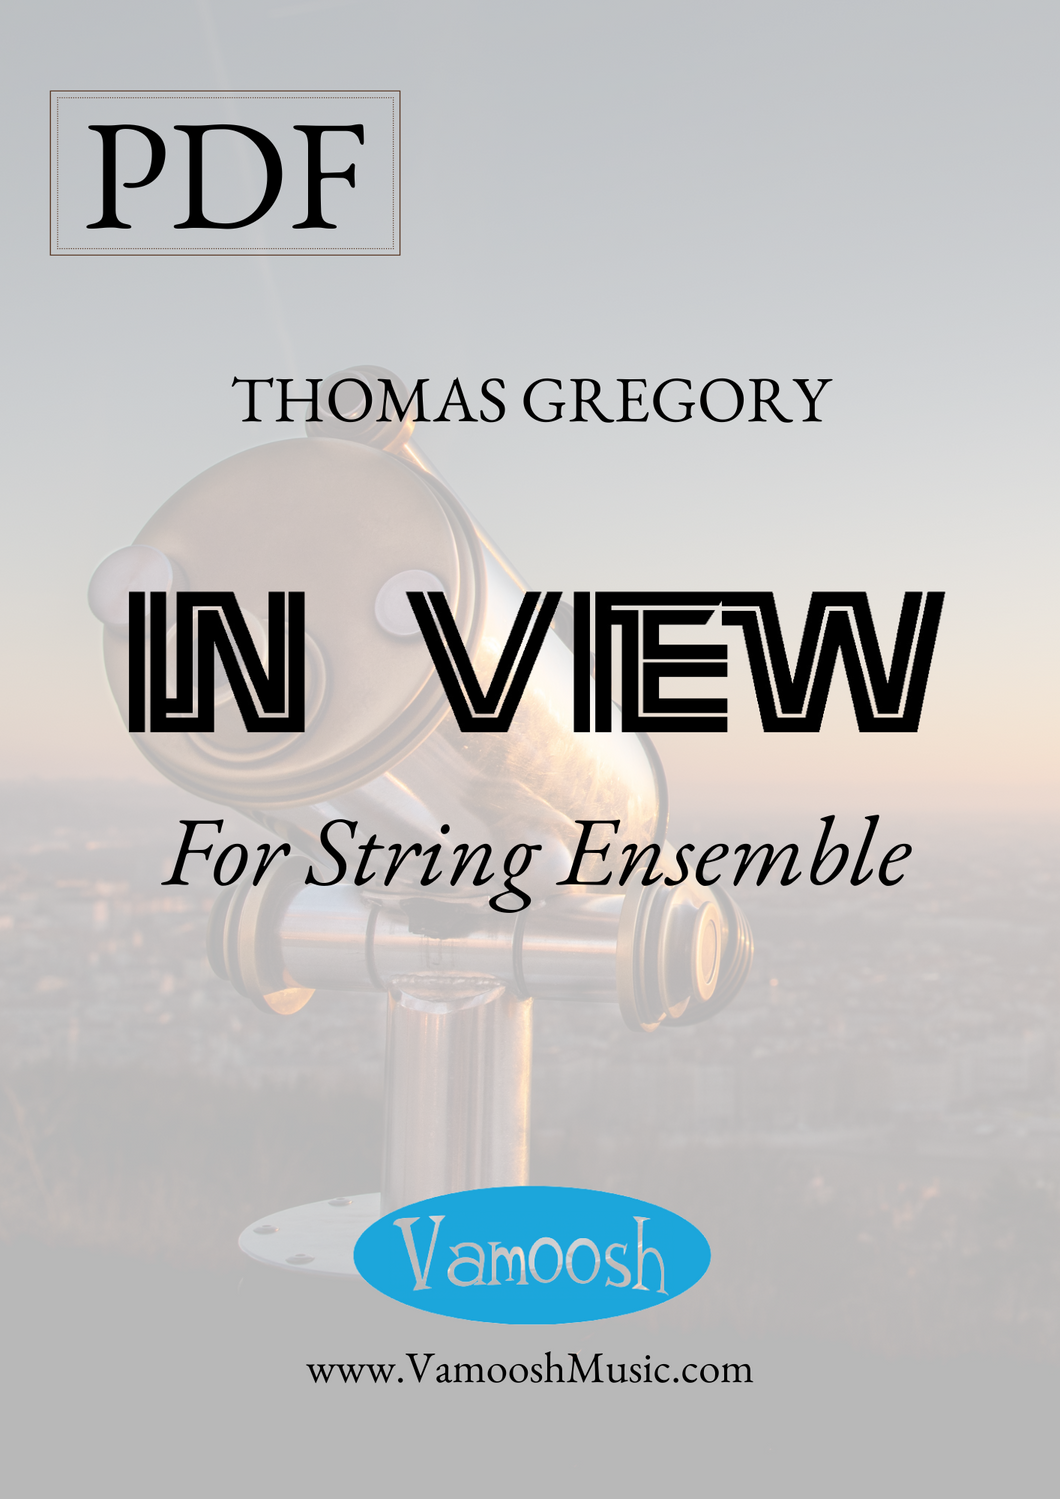 In View for String Ensemble by Thomas Gregory